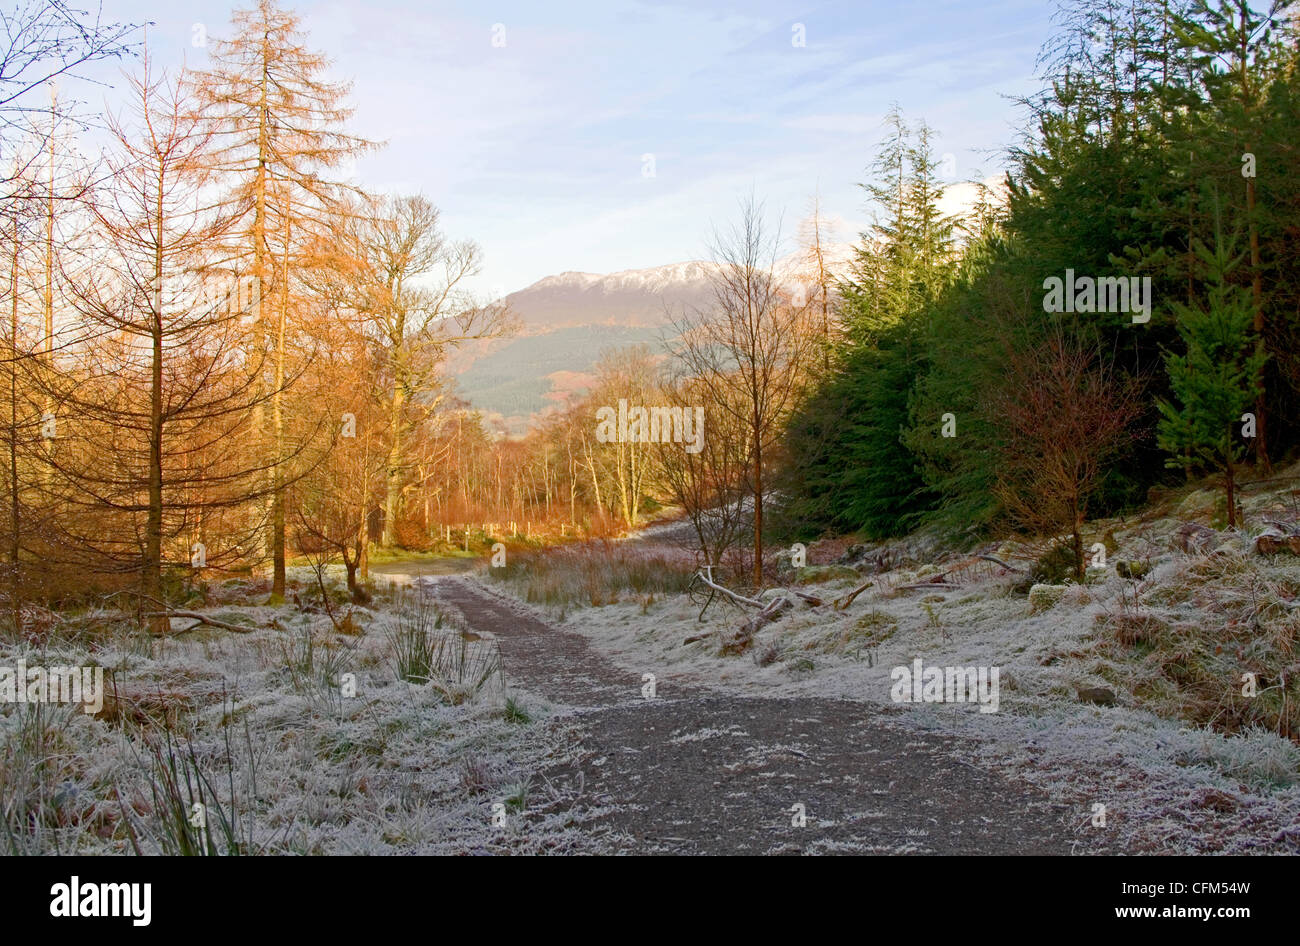 Snow-capped Skiddaw seen from footpath in Whinlatter Forest, sunny winter's day, near Keswick, Lake District, Cumbria England UK Stock Photo